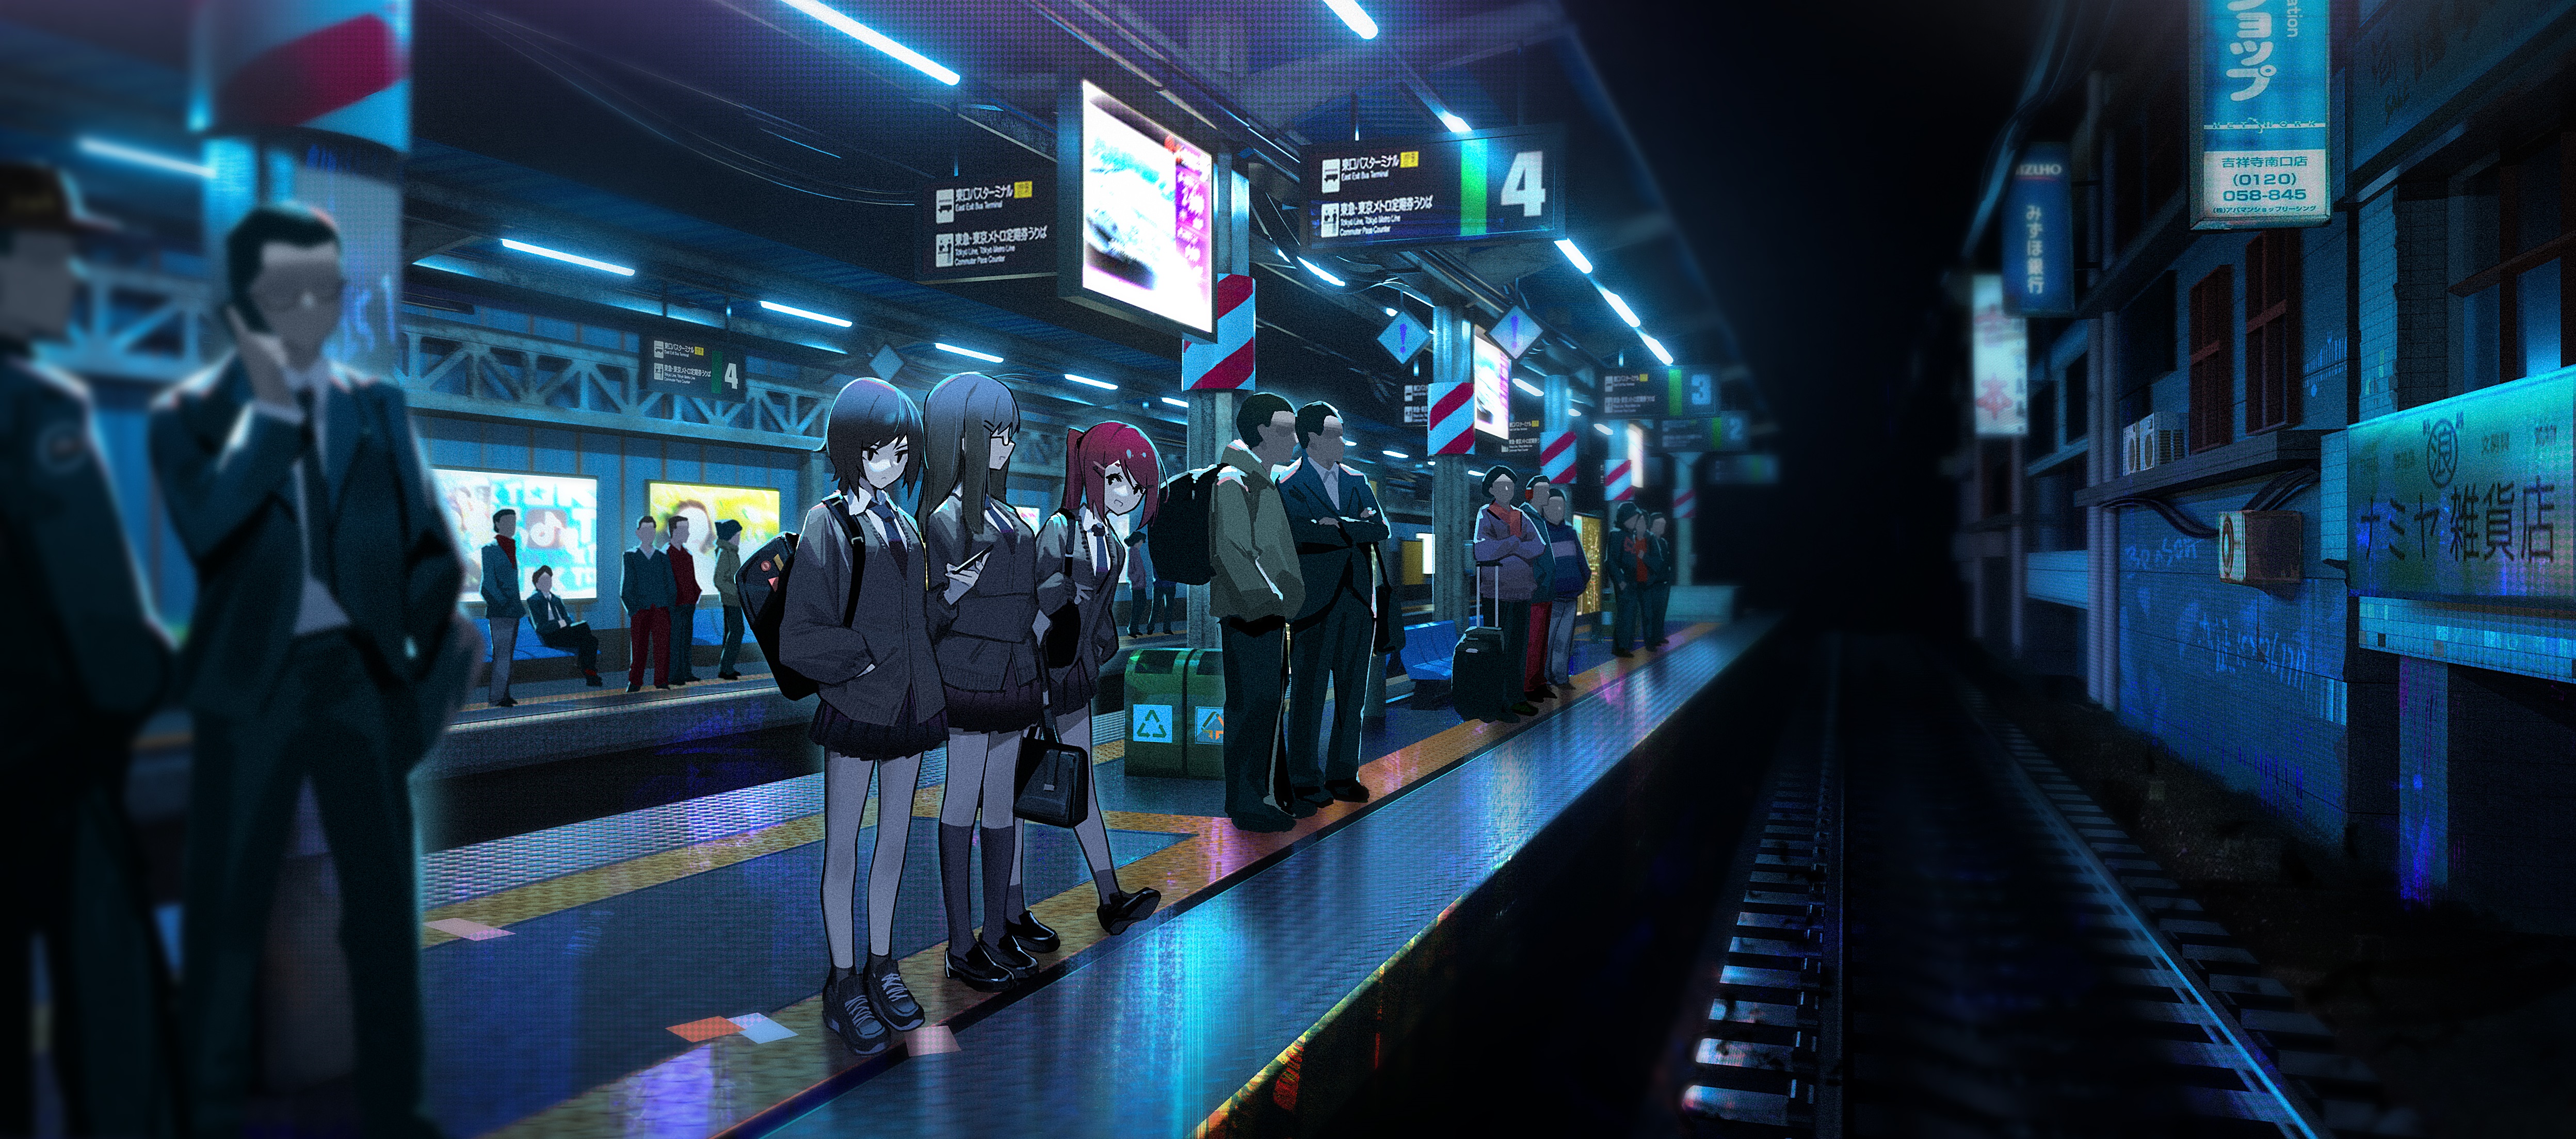 Waiting for the Train With Friends by 科学